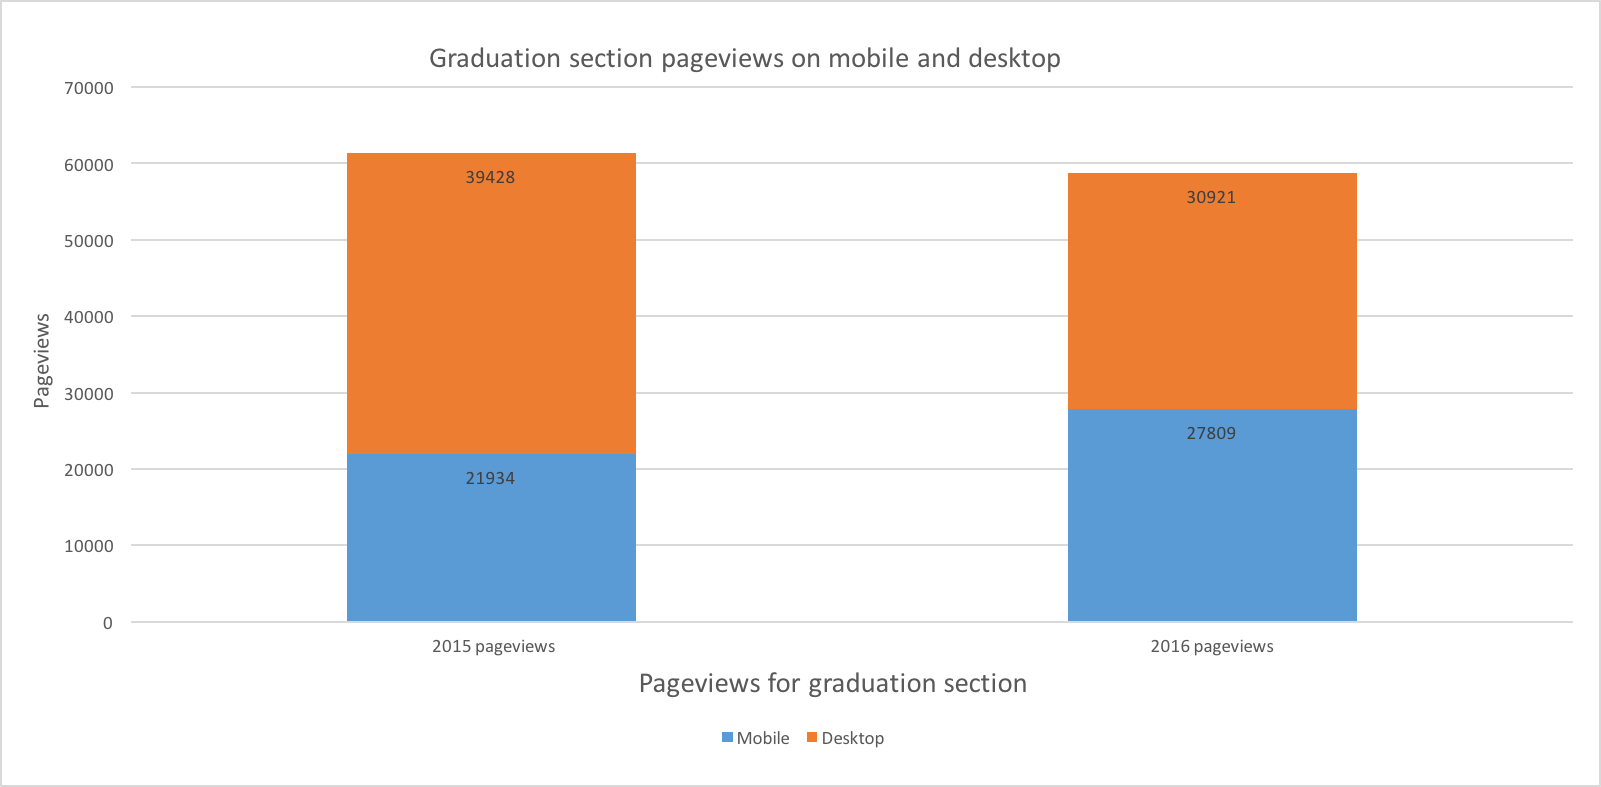 While there was less pageviews to the graduation section in 2016, more of these views were from mobile users. 